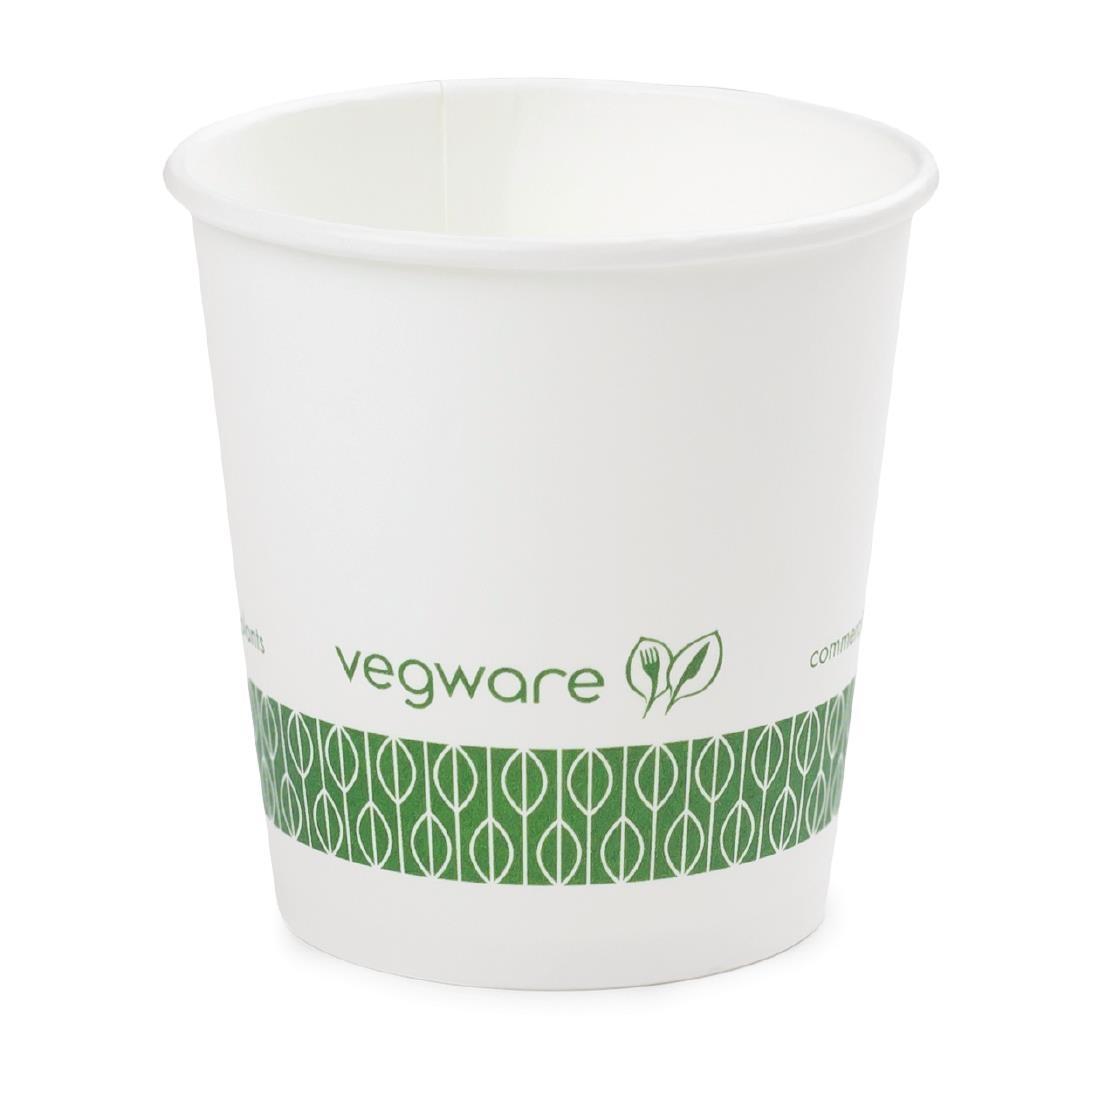 Vegware Compostable Espresso Cups Single Wall 114ml / 4oz (Pack of 1000) - GH028  - 1